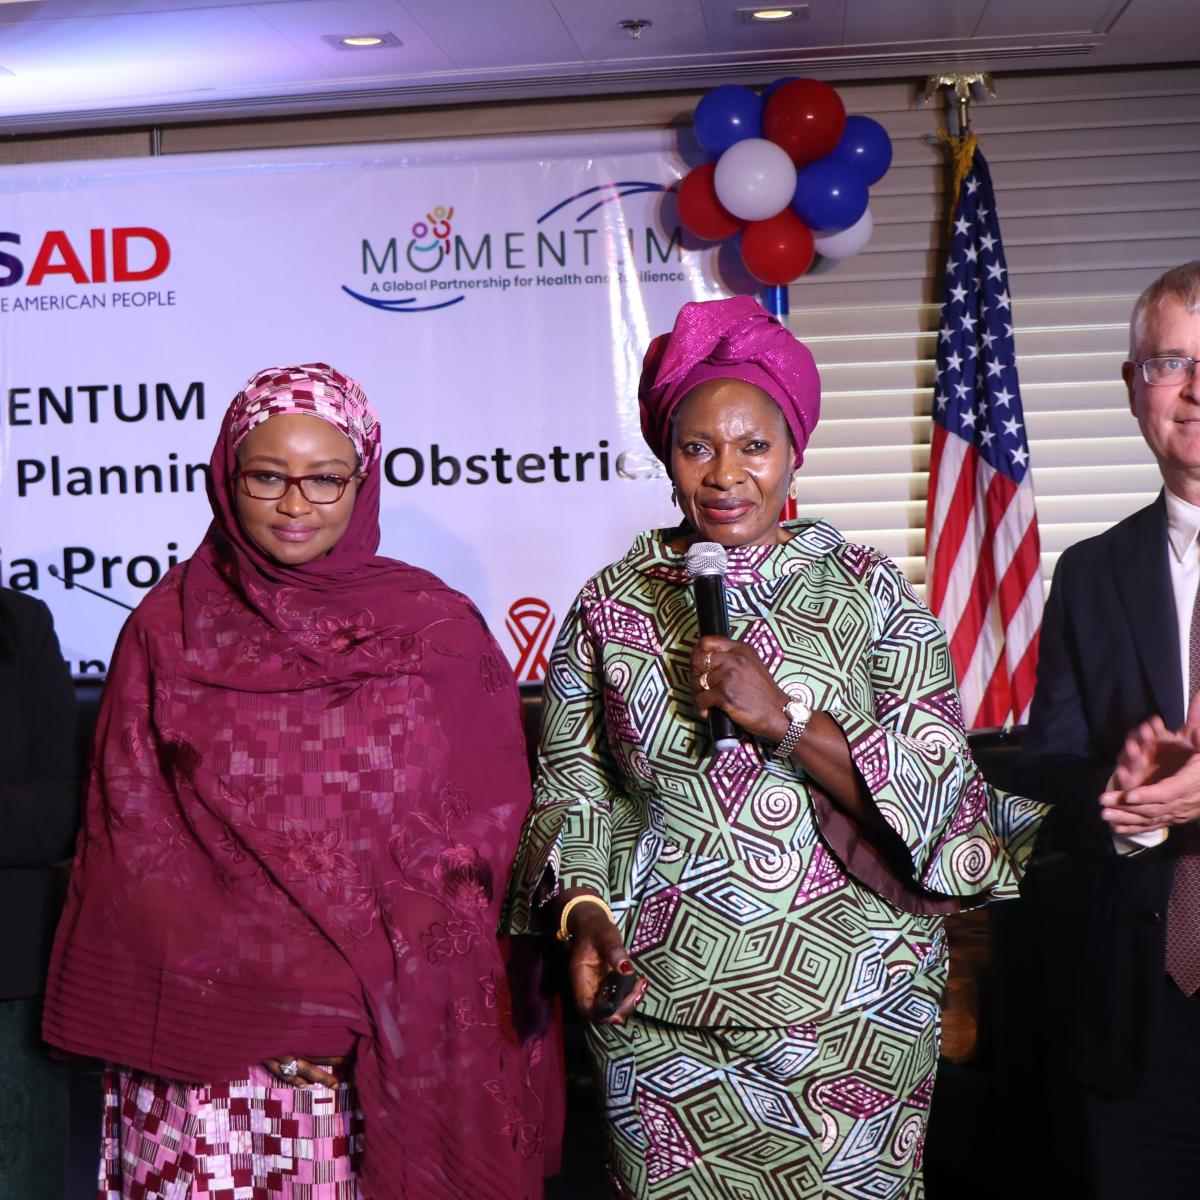 Nigerian Minister of Women and Social Affairs Dame Pauline Tallen (third right) announces the launch of the USAID Safe Surgery in Family Planning and Obstetrics activity to help more women in Nigeria overcome the burden of obstetric fistula.  Joining Minister Tallen were Dr. Zainab Shinkafi Bagudu, First Lady of Kebbi State (second left), USAID Health Office Director Paul McDermott (right) and EngenderHealth Regional Representative Nene Cisse (left). 